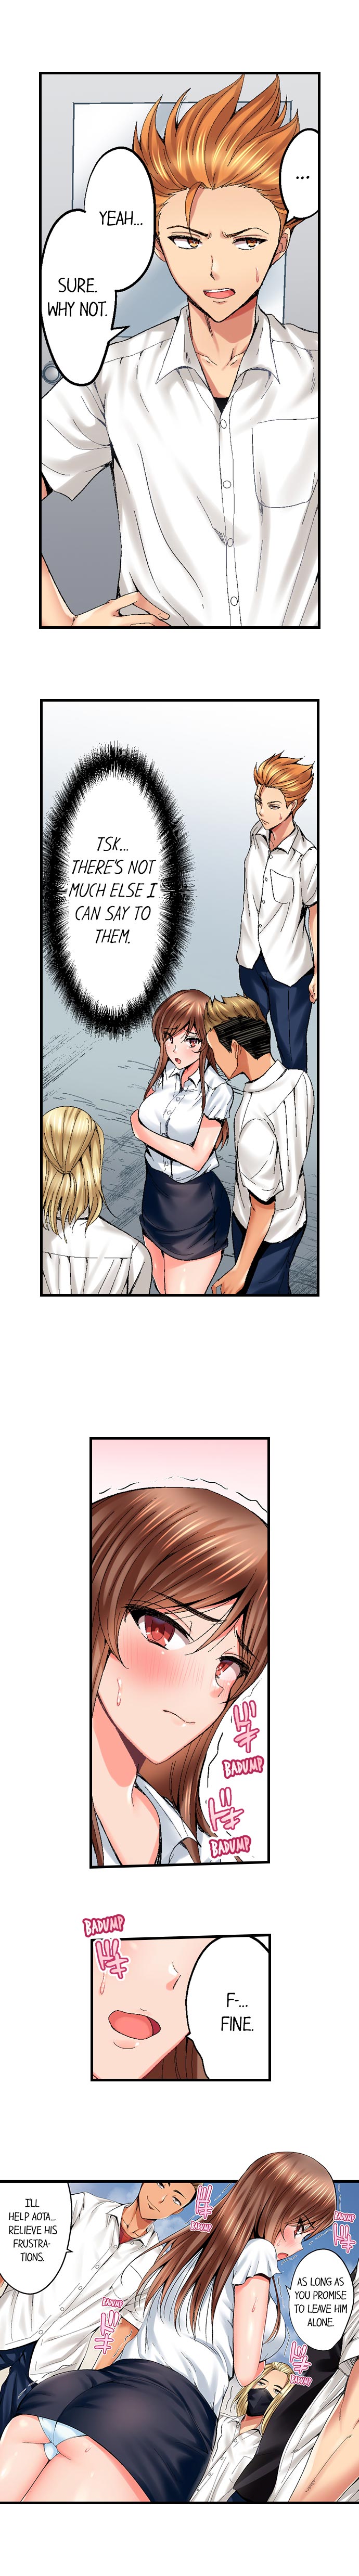 Netorare My Teacher With My Friends - Chapter 1 Page 9